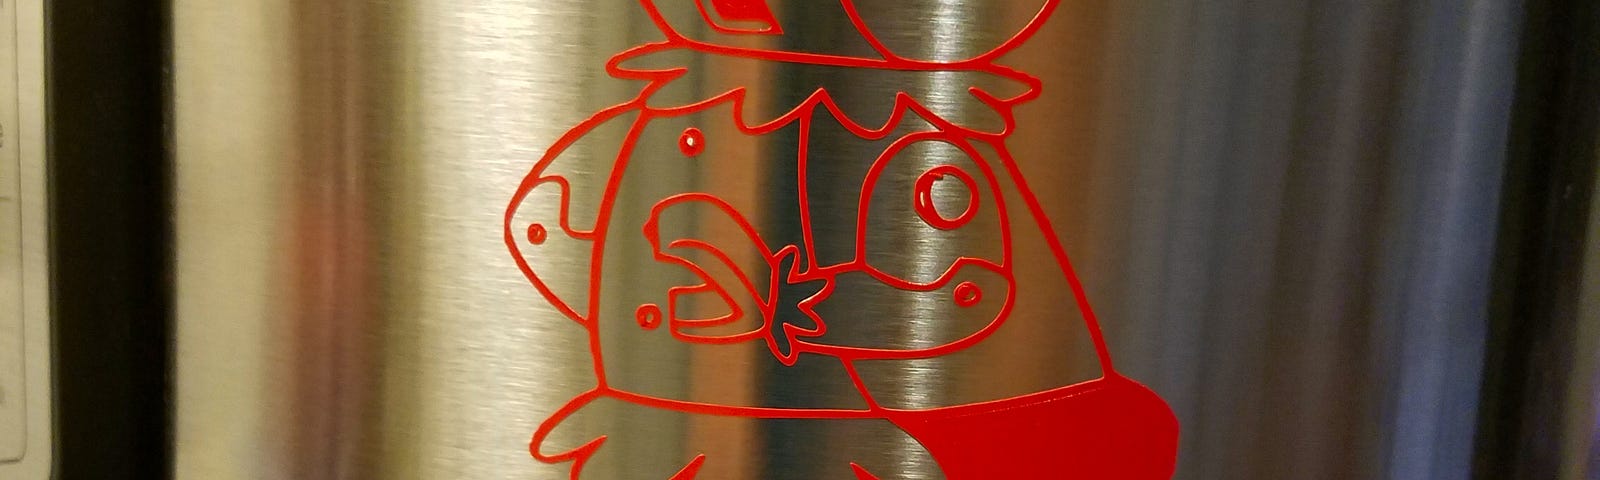 A red decal of Rosie the Robot from the animated series “The Jetsons” is prominently displayed on the side of a stainless steel kitchen appliance. Below the decal, the name “Rosie the Robot” is written in red to match the character’s outline.